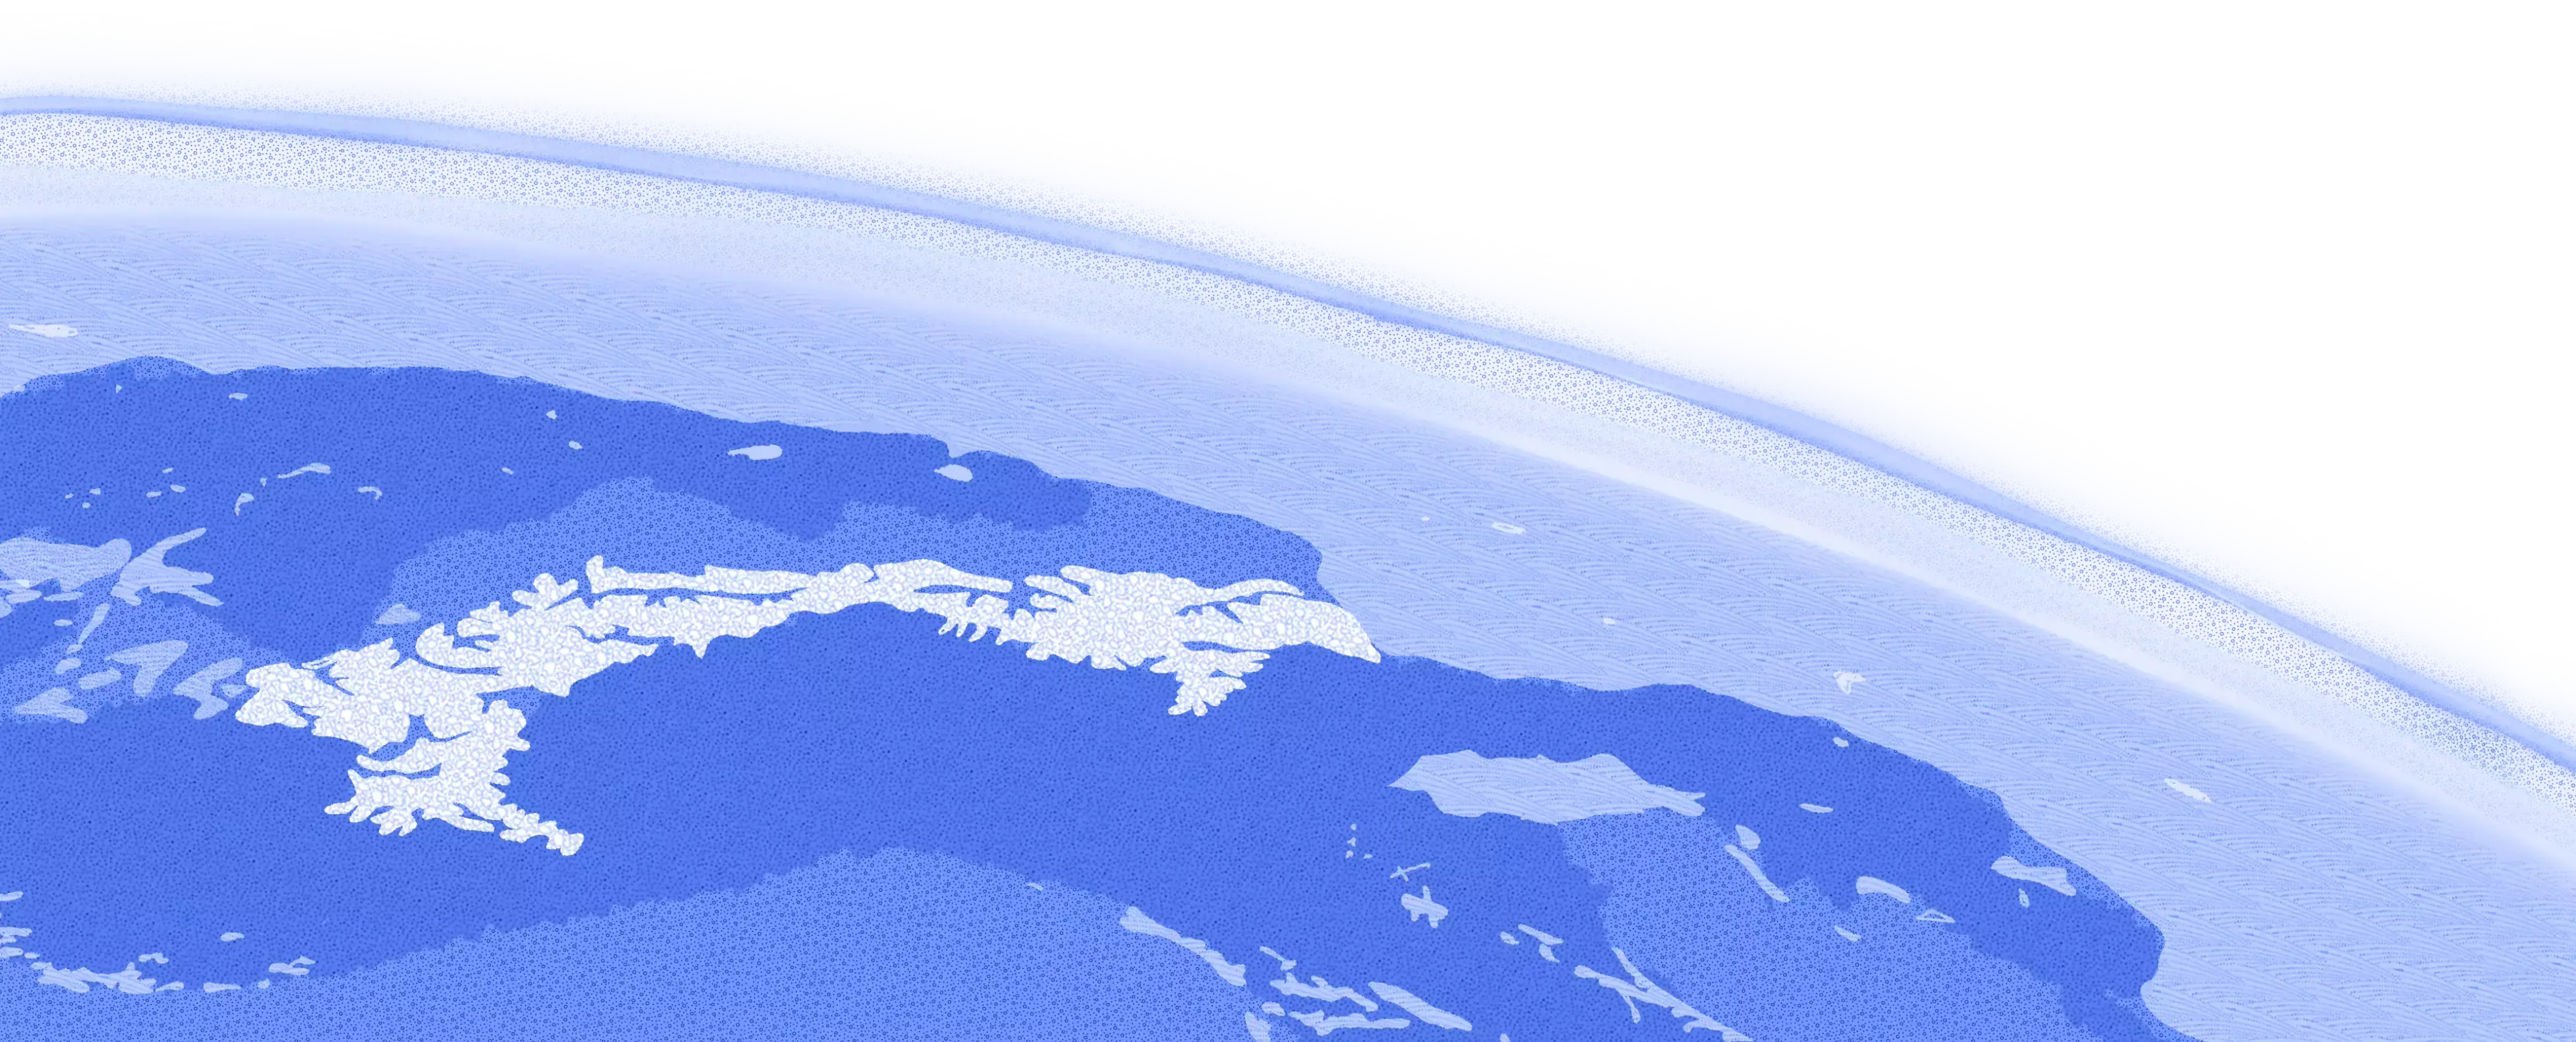 Textured earth